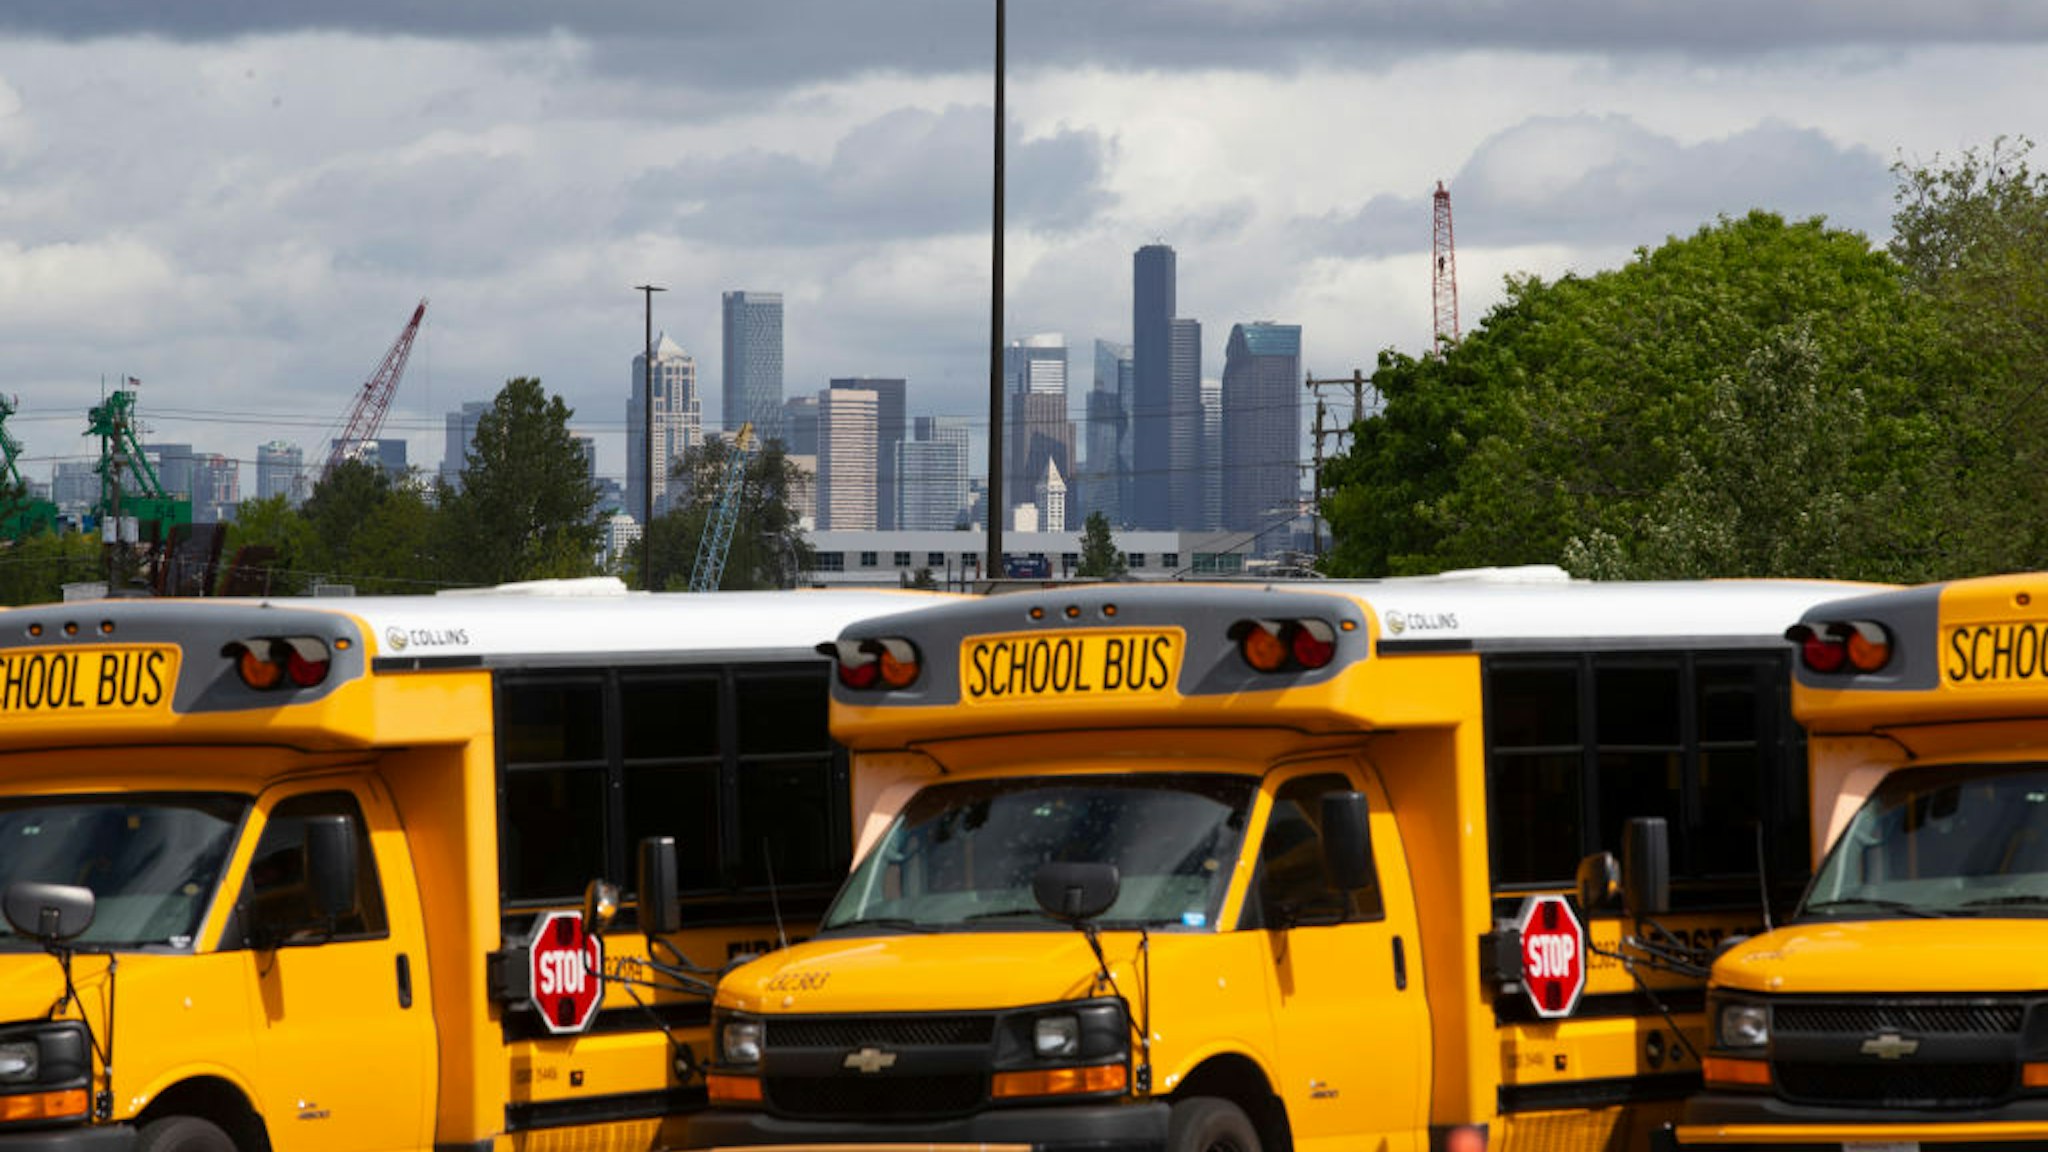 School buses sit idle in a bus yard on May 6, 2020 in Seattle, Washington.